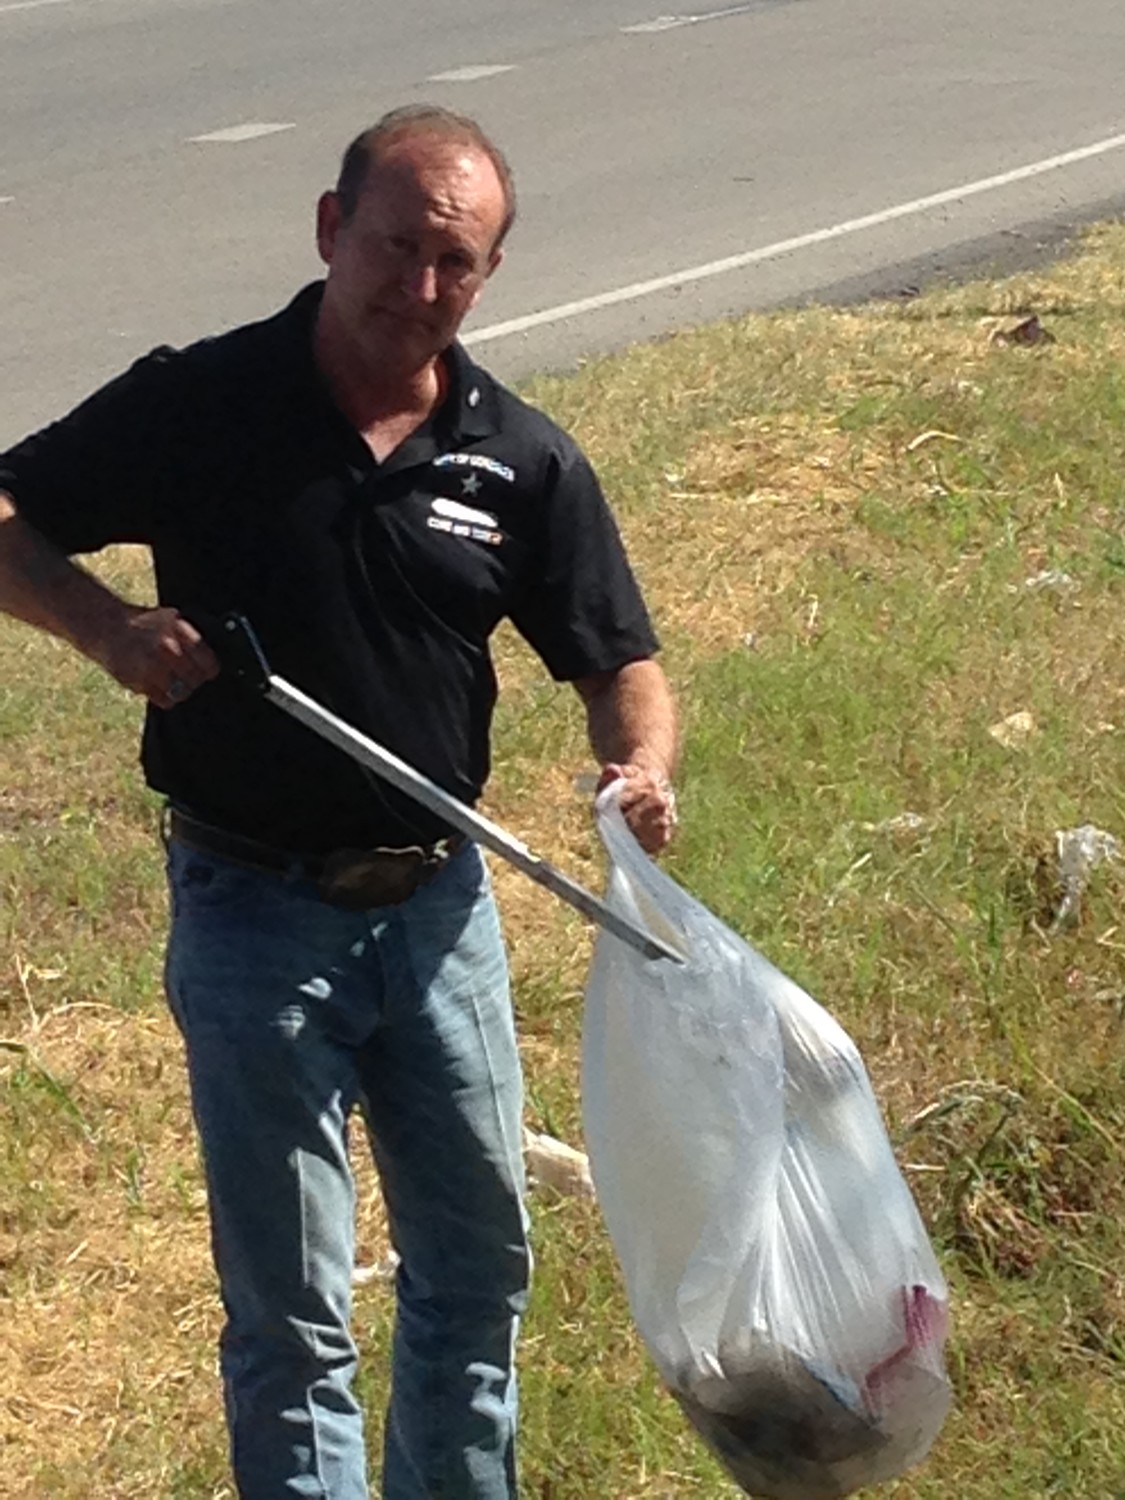 Gonzales City Tourism Director Clint Hille helped clean up trash along the highway near J.B. Wells over the weekend.